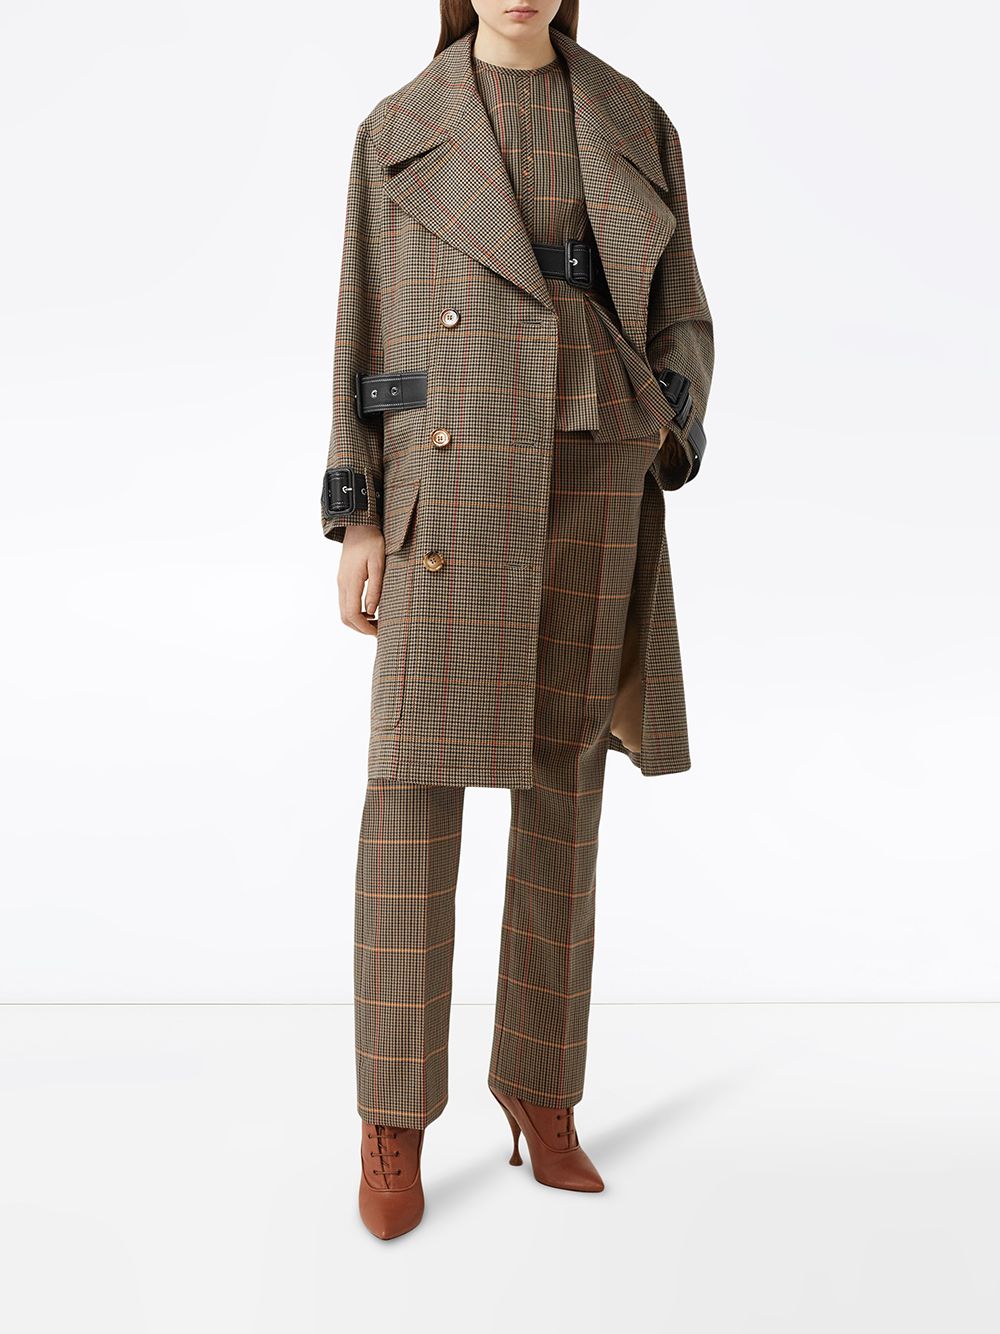 Burberry Houndstooth Check Wool double-breasted Coat - Farfetch